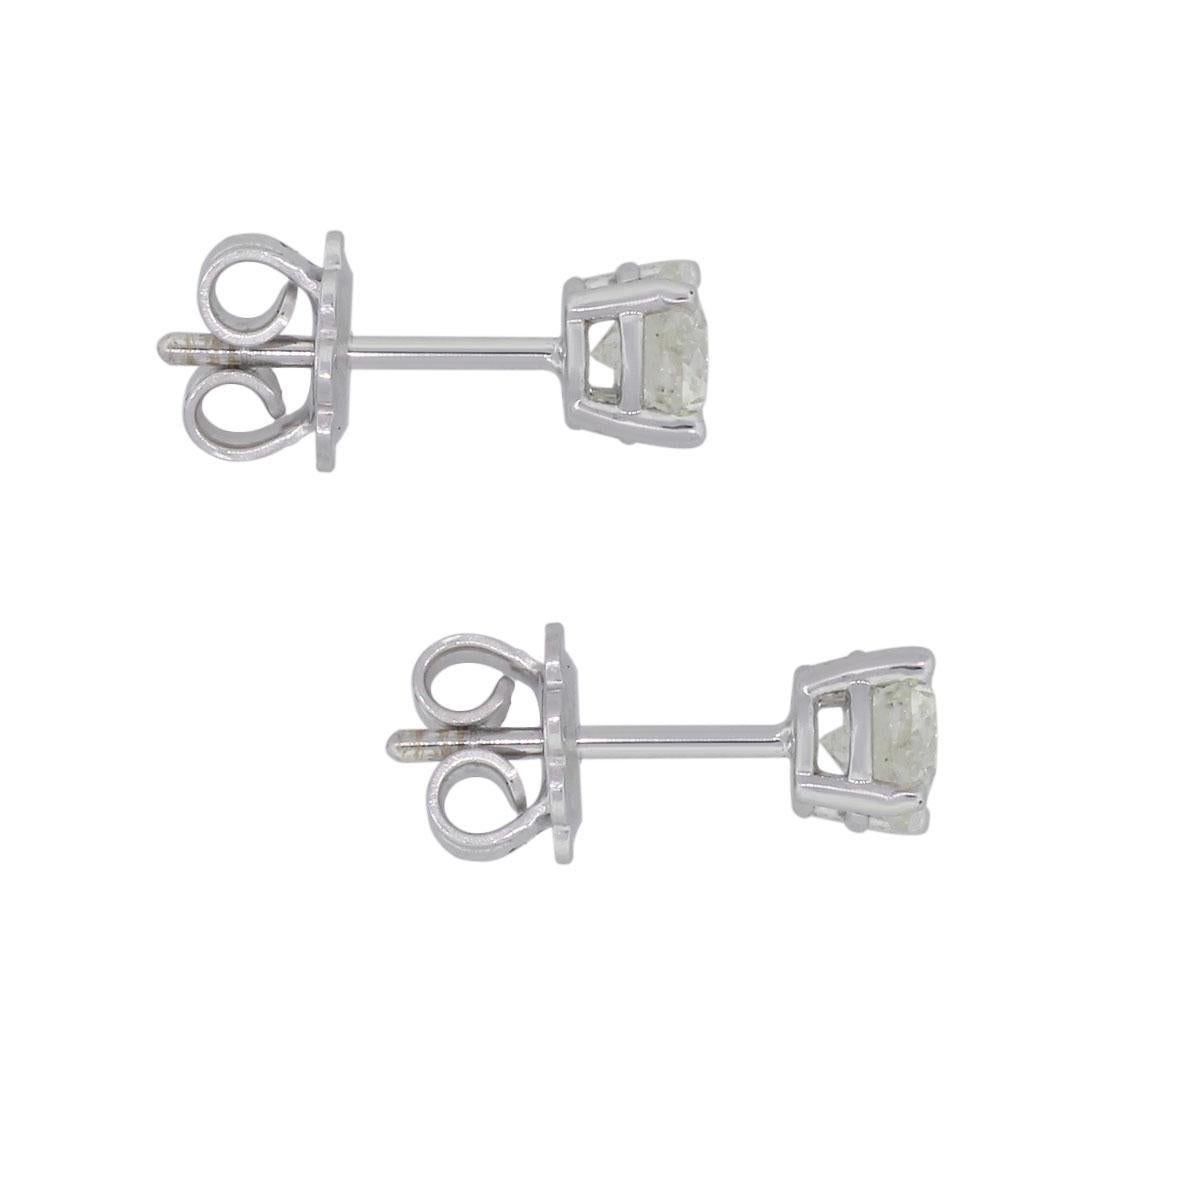 Material: 14k white gold
Diamond Detail: Approximately 1.33ctw of round brilliant diamonds. Diamonds are I/J in color, I1 in clarity
Measurements: 0.59″ x 0.20″ x 0.20″
Earrings Backs: Post friction
Total Weight: 2g (1.3dwt)
Additional Details: This